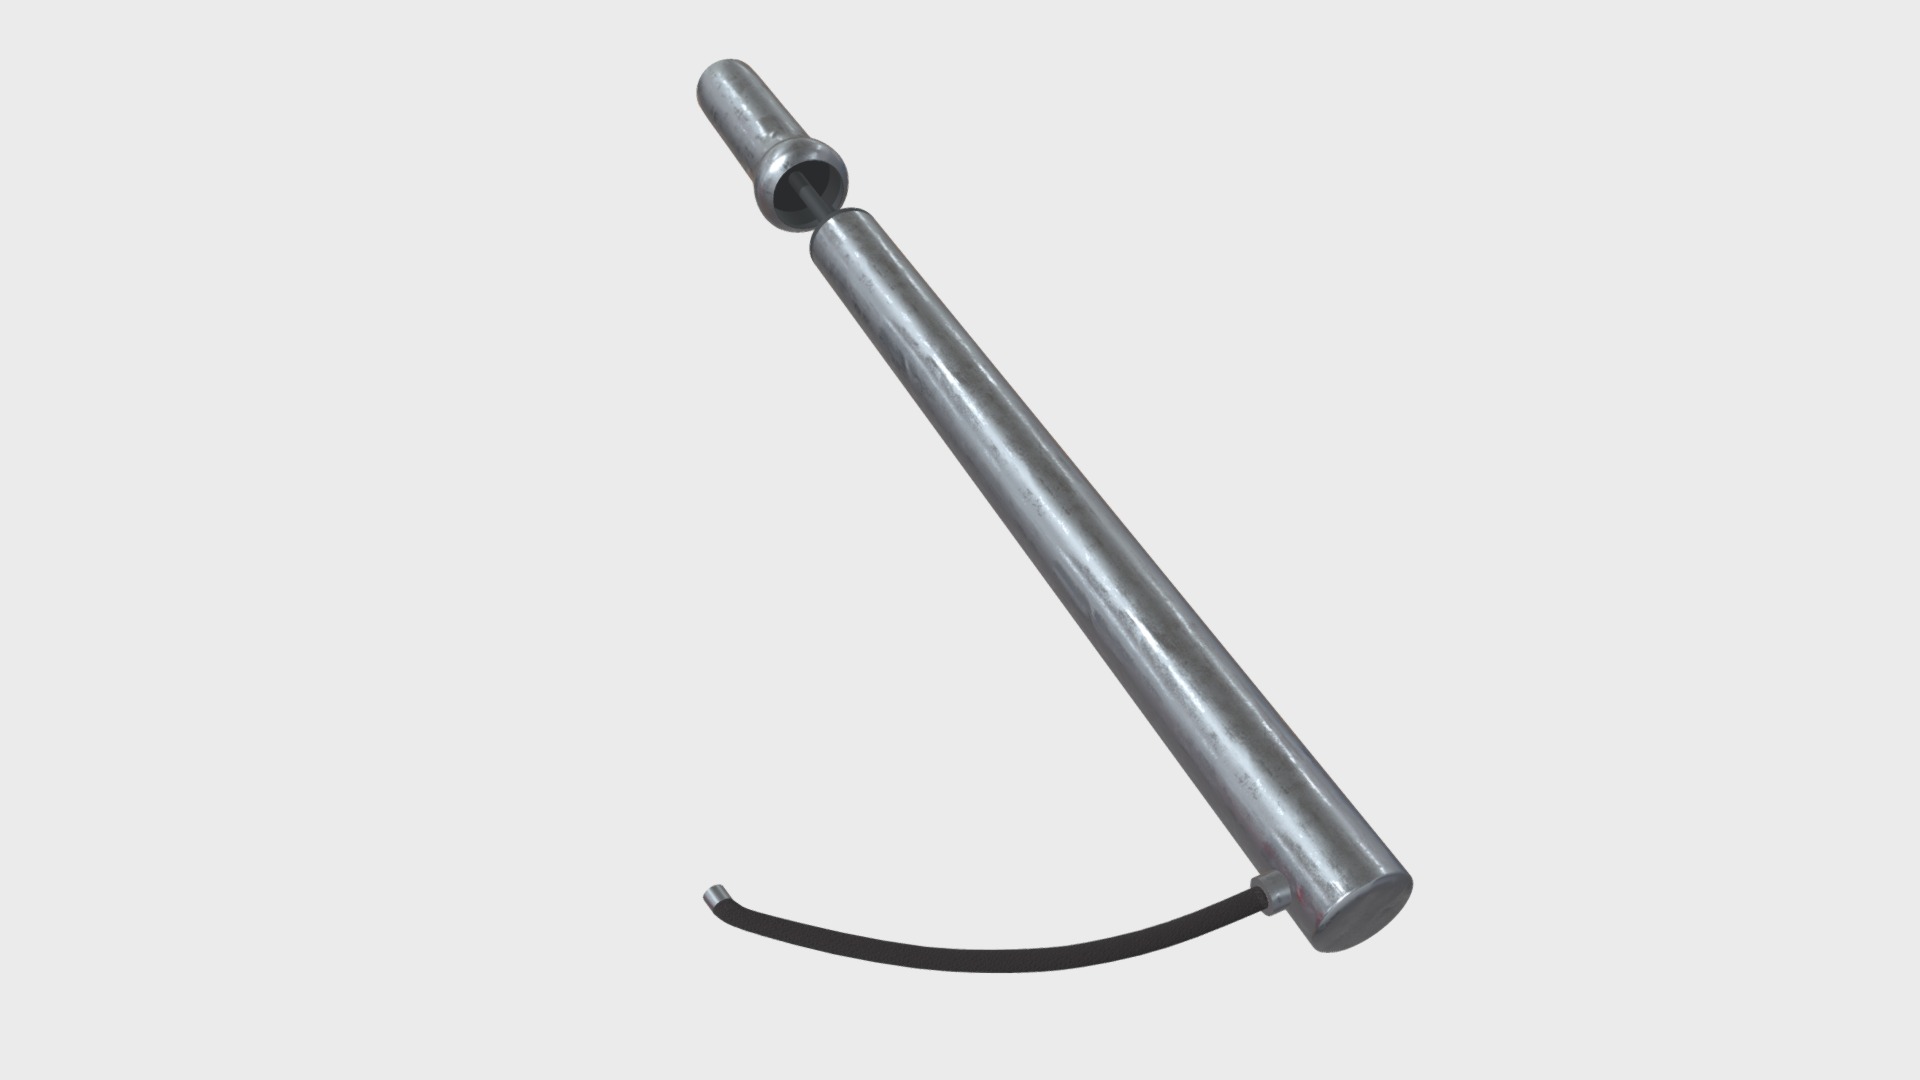 3D model Bicycle pump - This is a 3D model of the Bicycle pump. The 3D model is about a black and silver metal object.